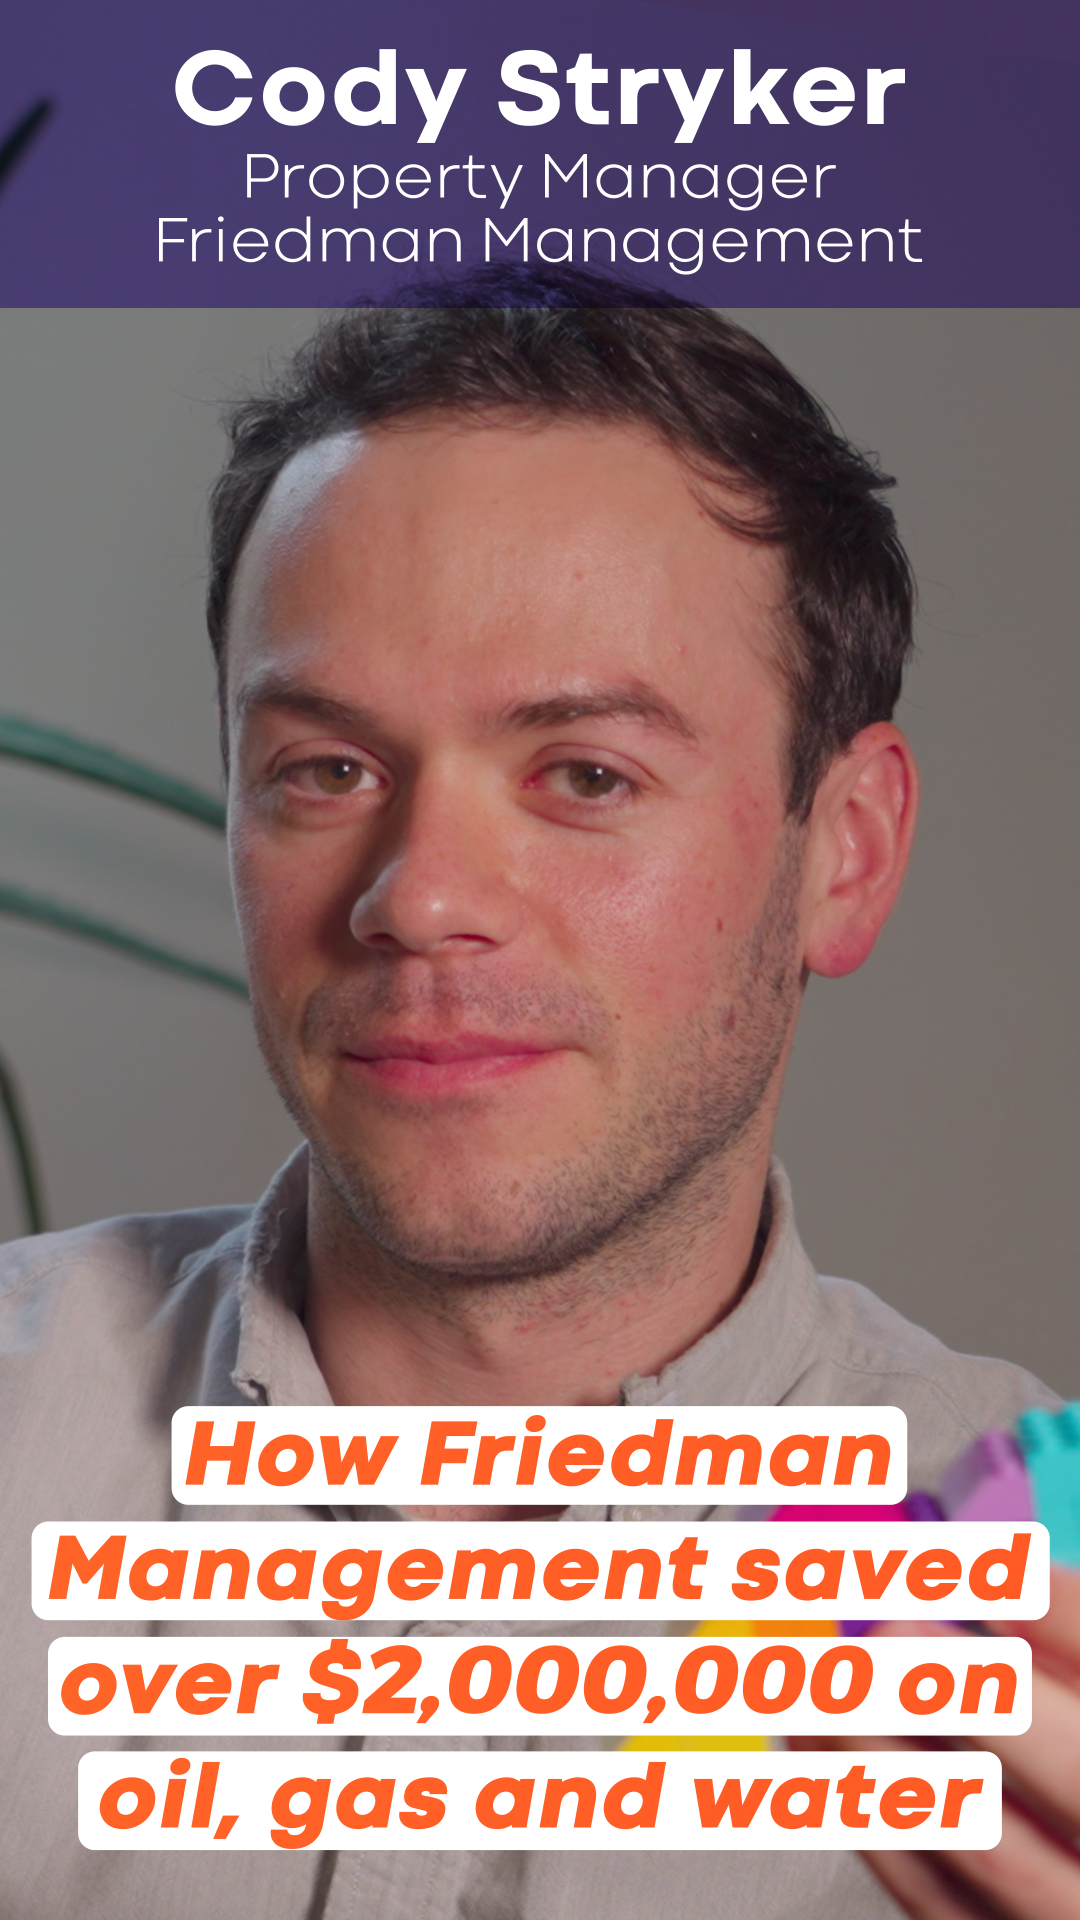 How Friedman Management saved over $2,000,000 on oil, gas, and water